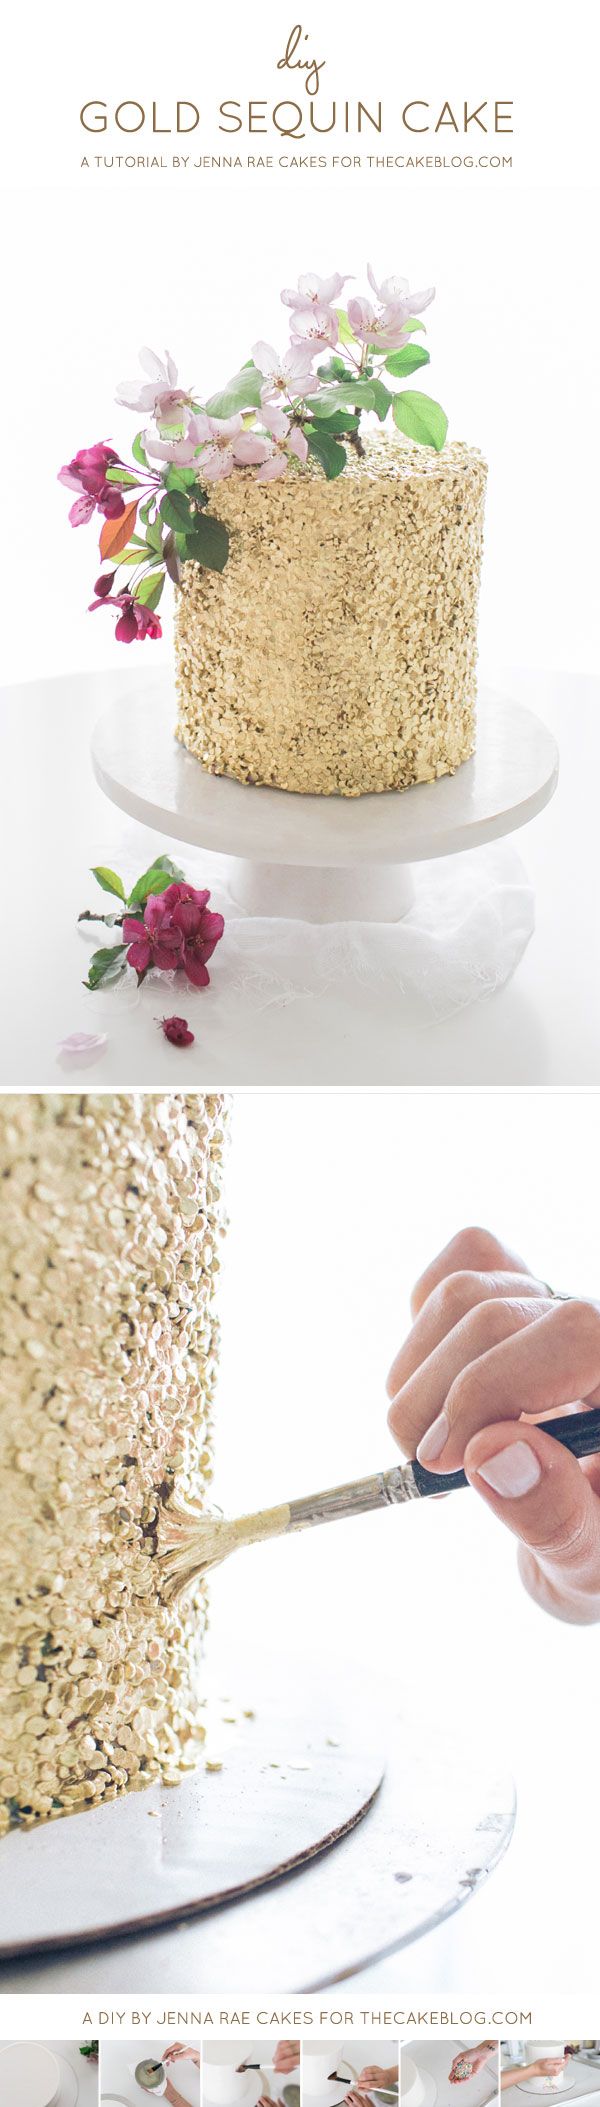 How to make a Gold Sequin Cake